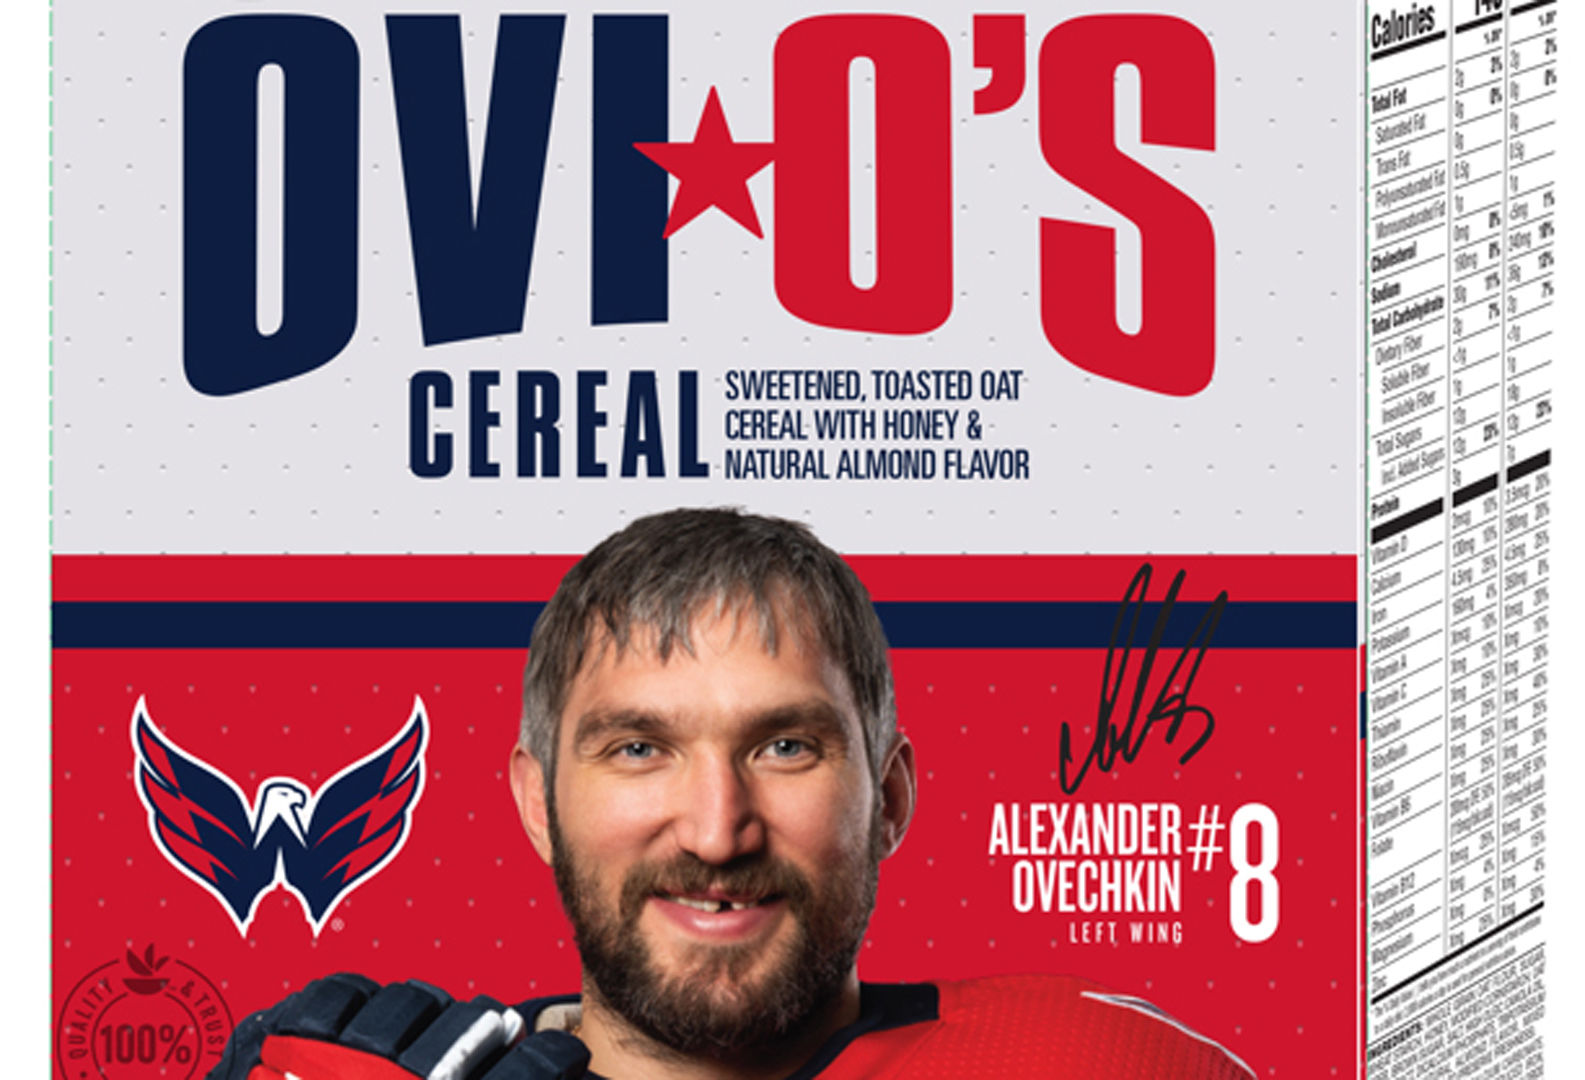 Alex Ovechkin presents his personal apparel brand created by Nike